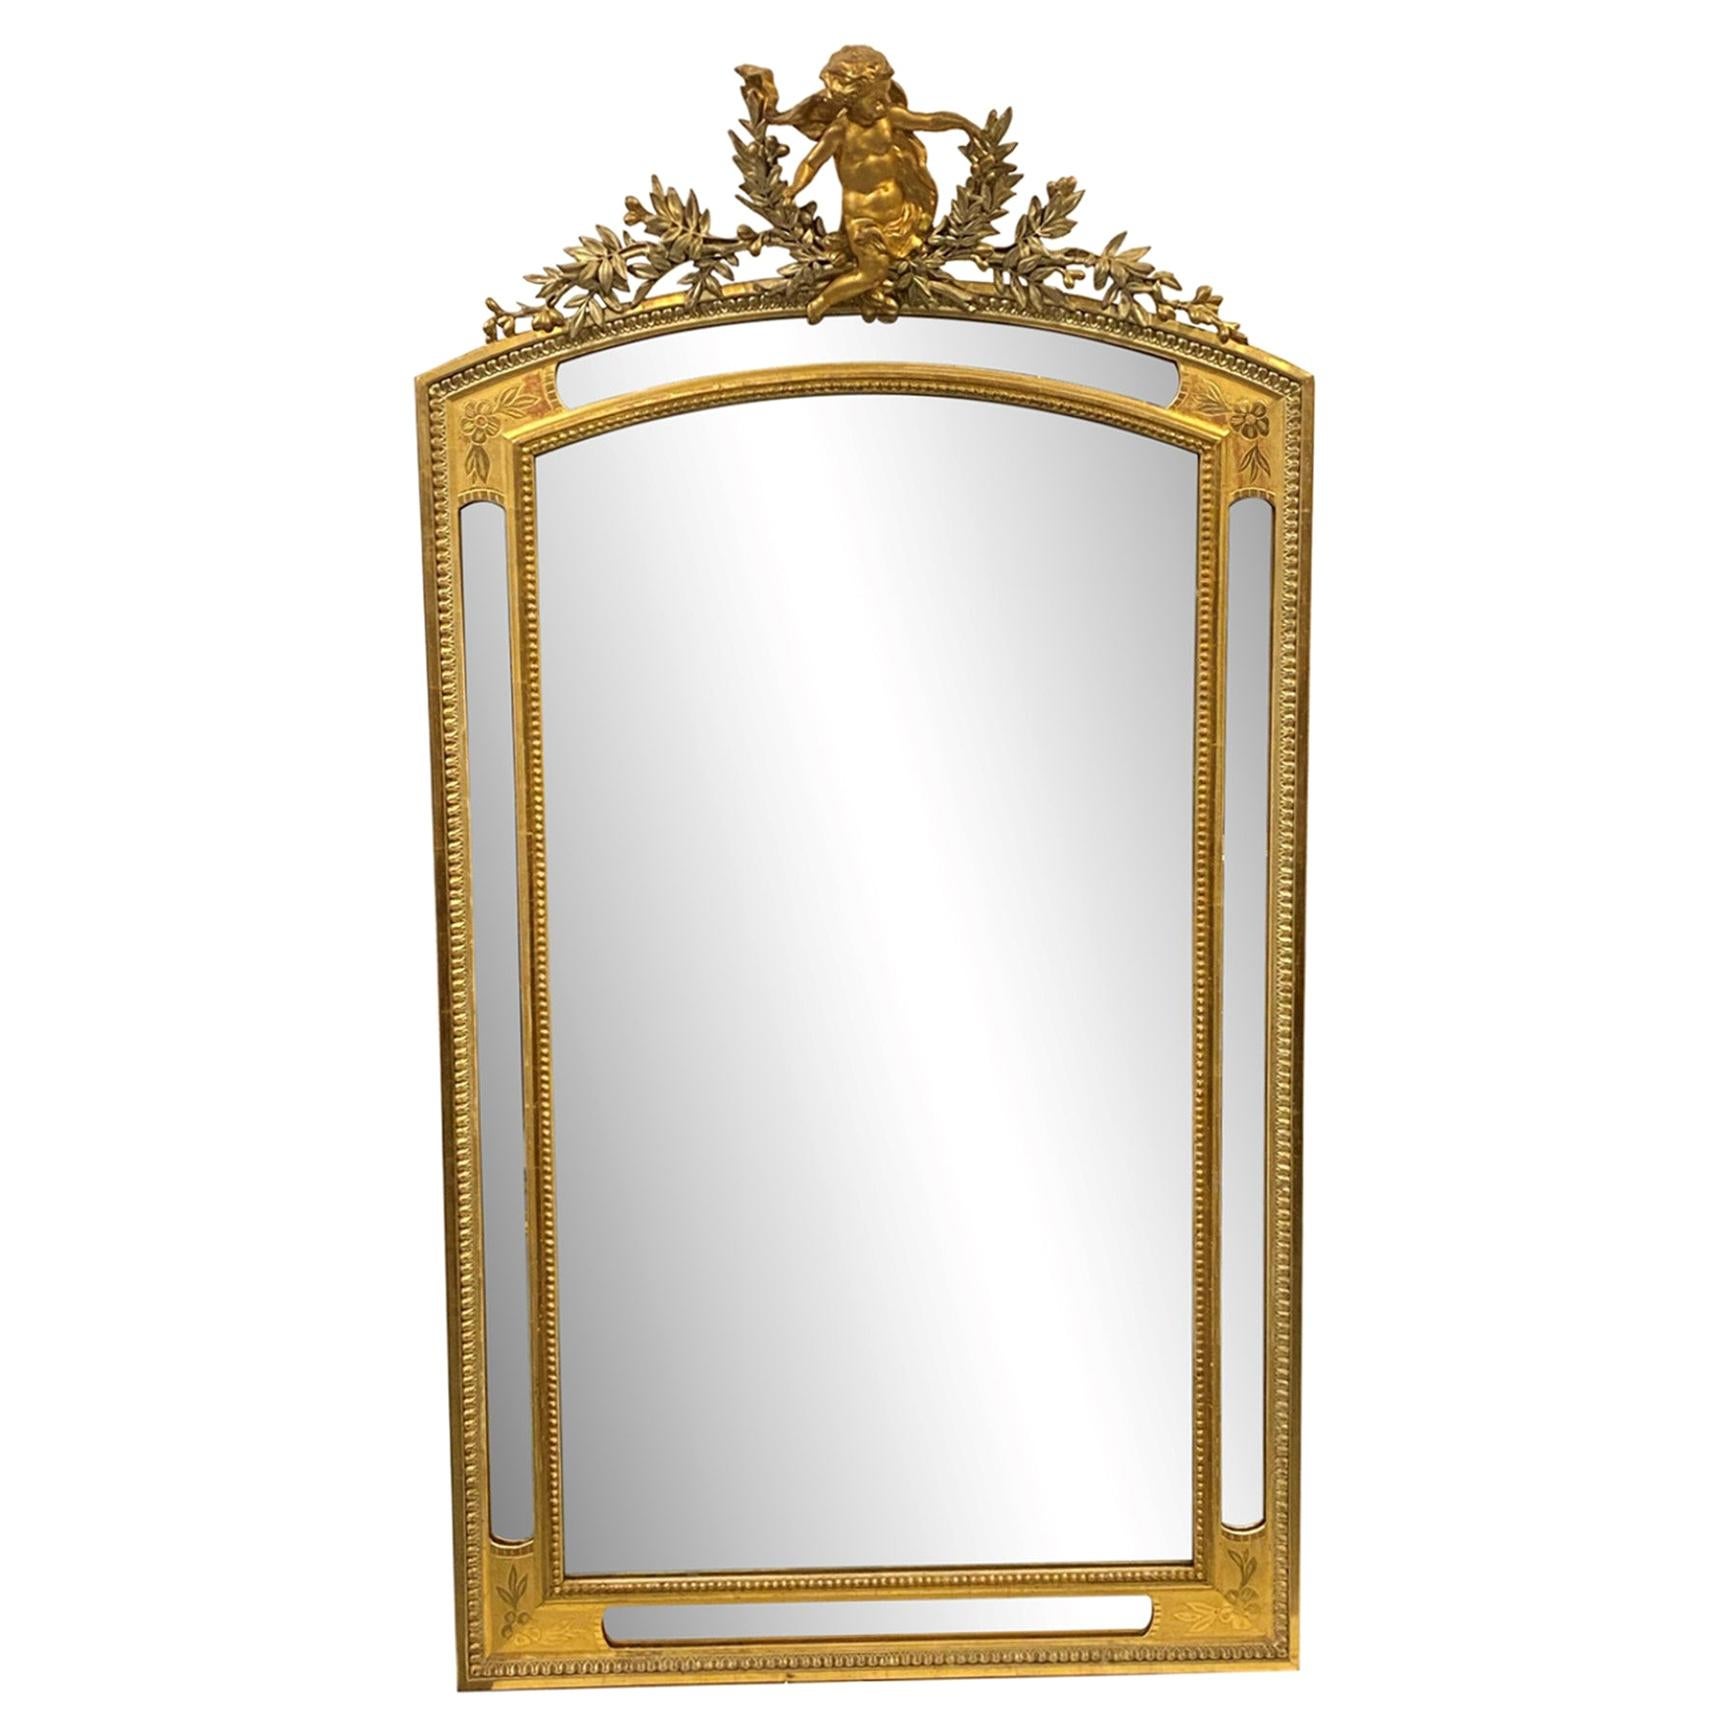 French Gilded Over Mantel Mirror Carved Cherub Floral Wood & Gesso Design 